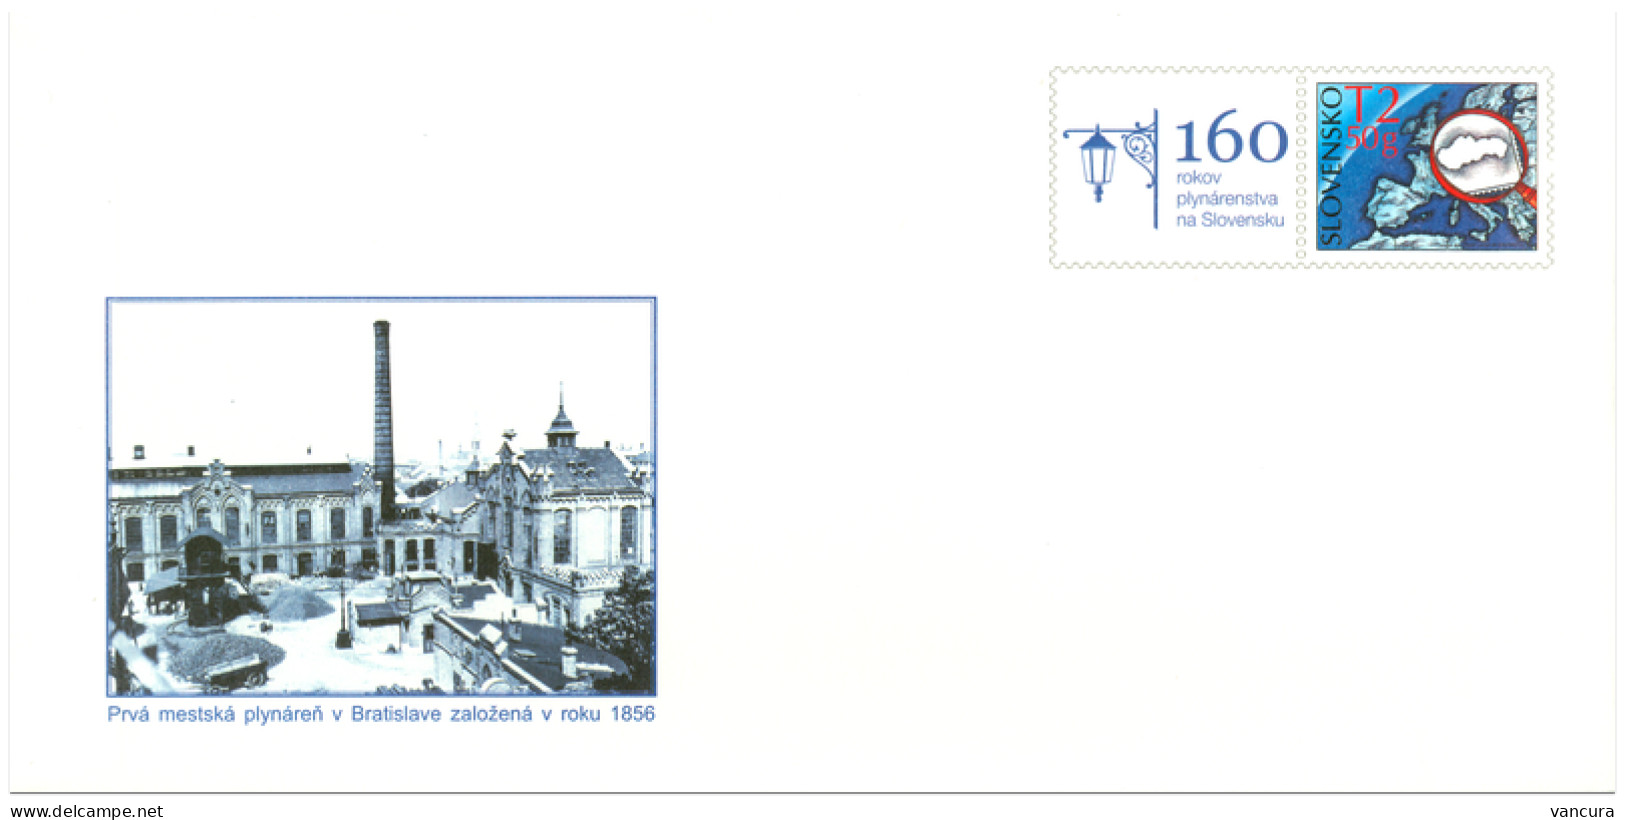 Envelope COP 005 Slovakia 160th Anniversary Of Gas Industry In Slovakia 2016 - Gas